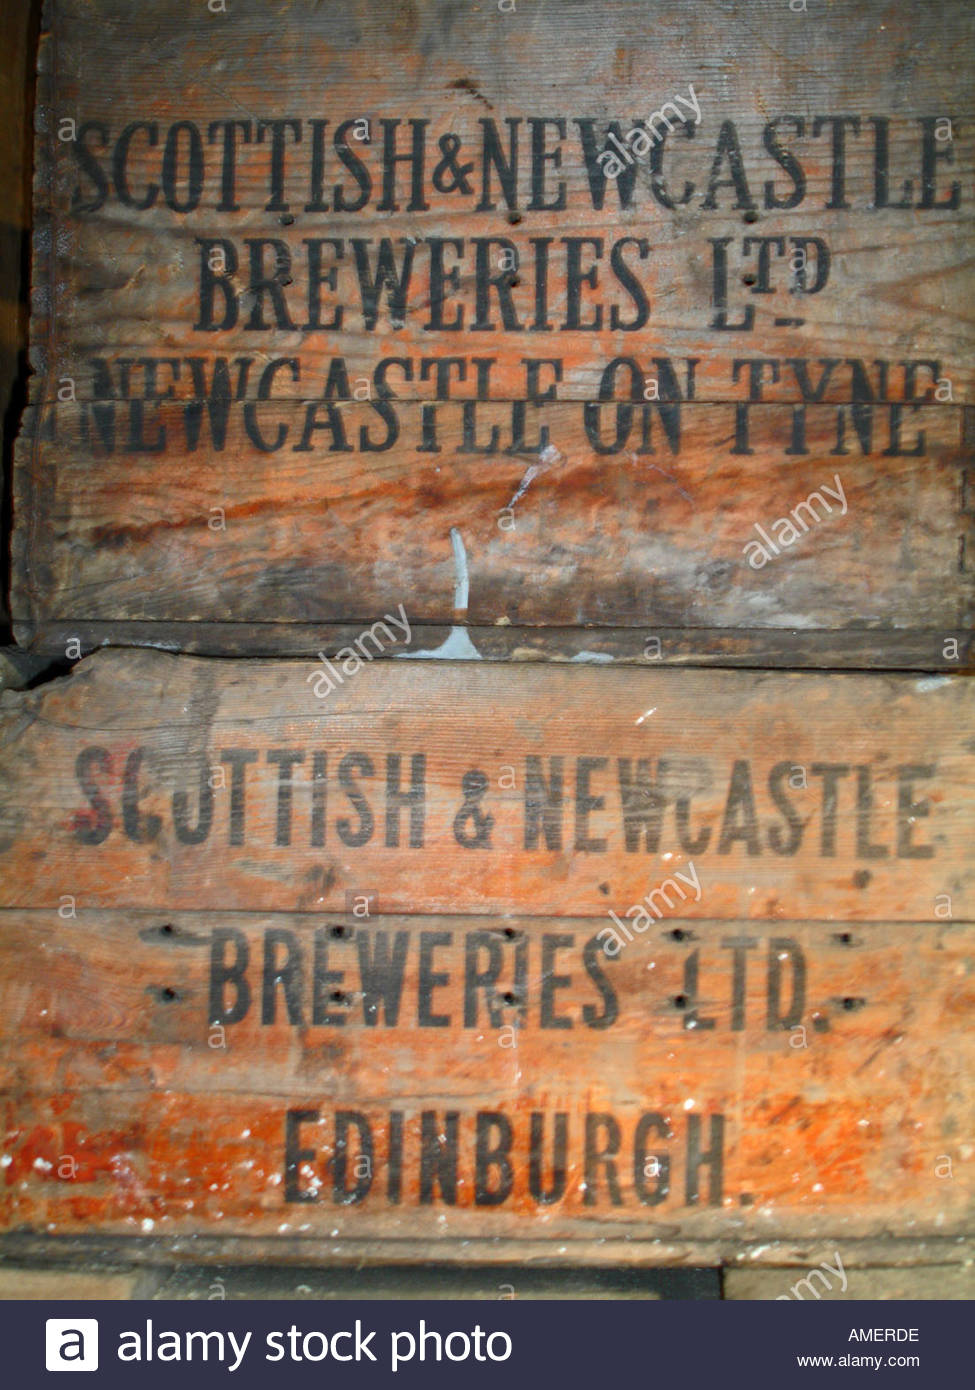 Old storage crates from Scottish and Newcastle brewery Stock Photo